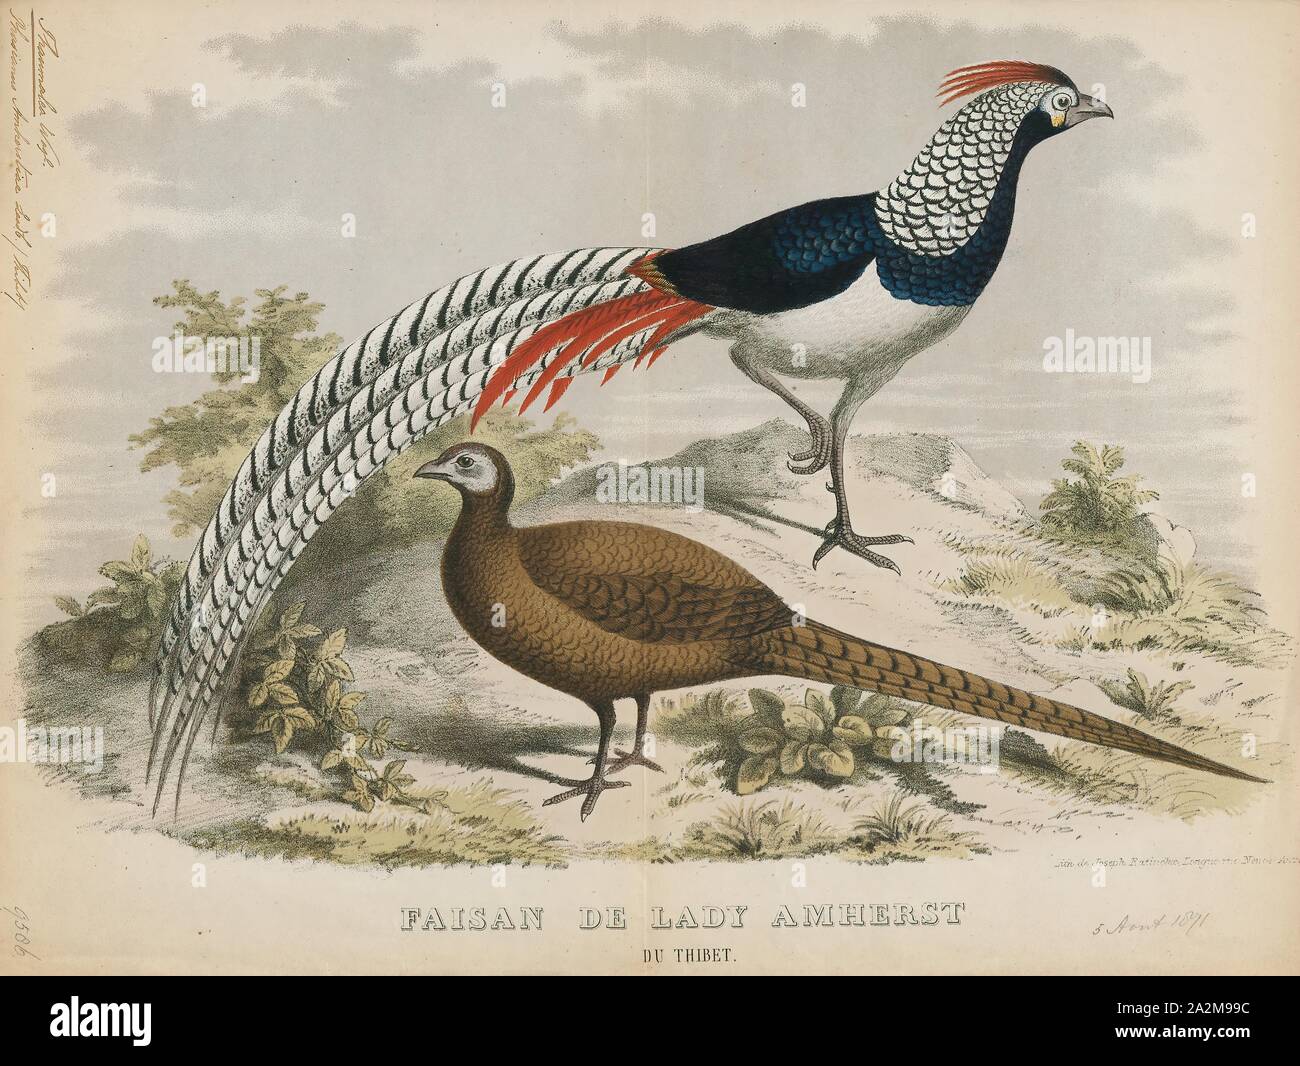 Chrysolophus amherstiae, Print, The Lady Amherst's pheasant (Chrysolophus amherstiae) is a bird of the order Galliformes and the family Phasianidae. The genus name is from Ancient Greek khrusolophos, 'with golden crest'. The English name and amherstiae commemorates Sarah Amherst, wife of William Pitt Amherst, Governor General of Bengal, who was responsible for sending the first specimen of the bird to London in 1828., 1871 Stock Photo